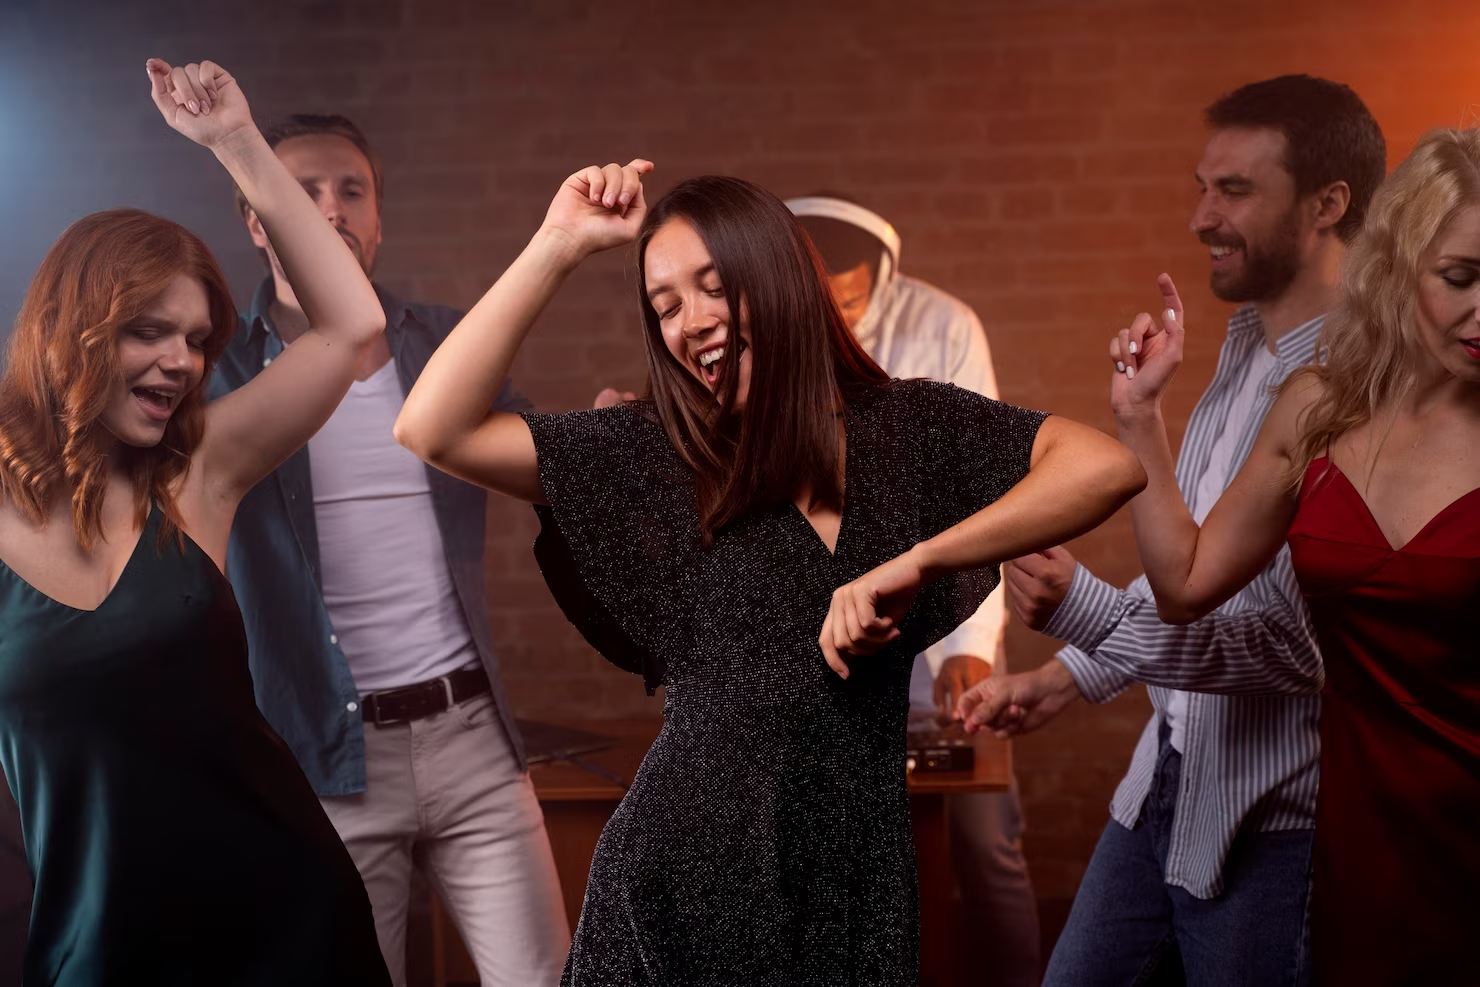 People dancing and having fun together on a night out.